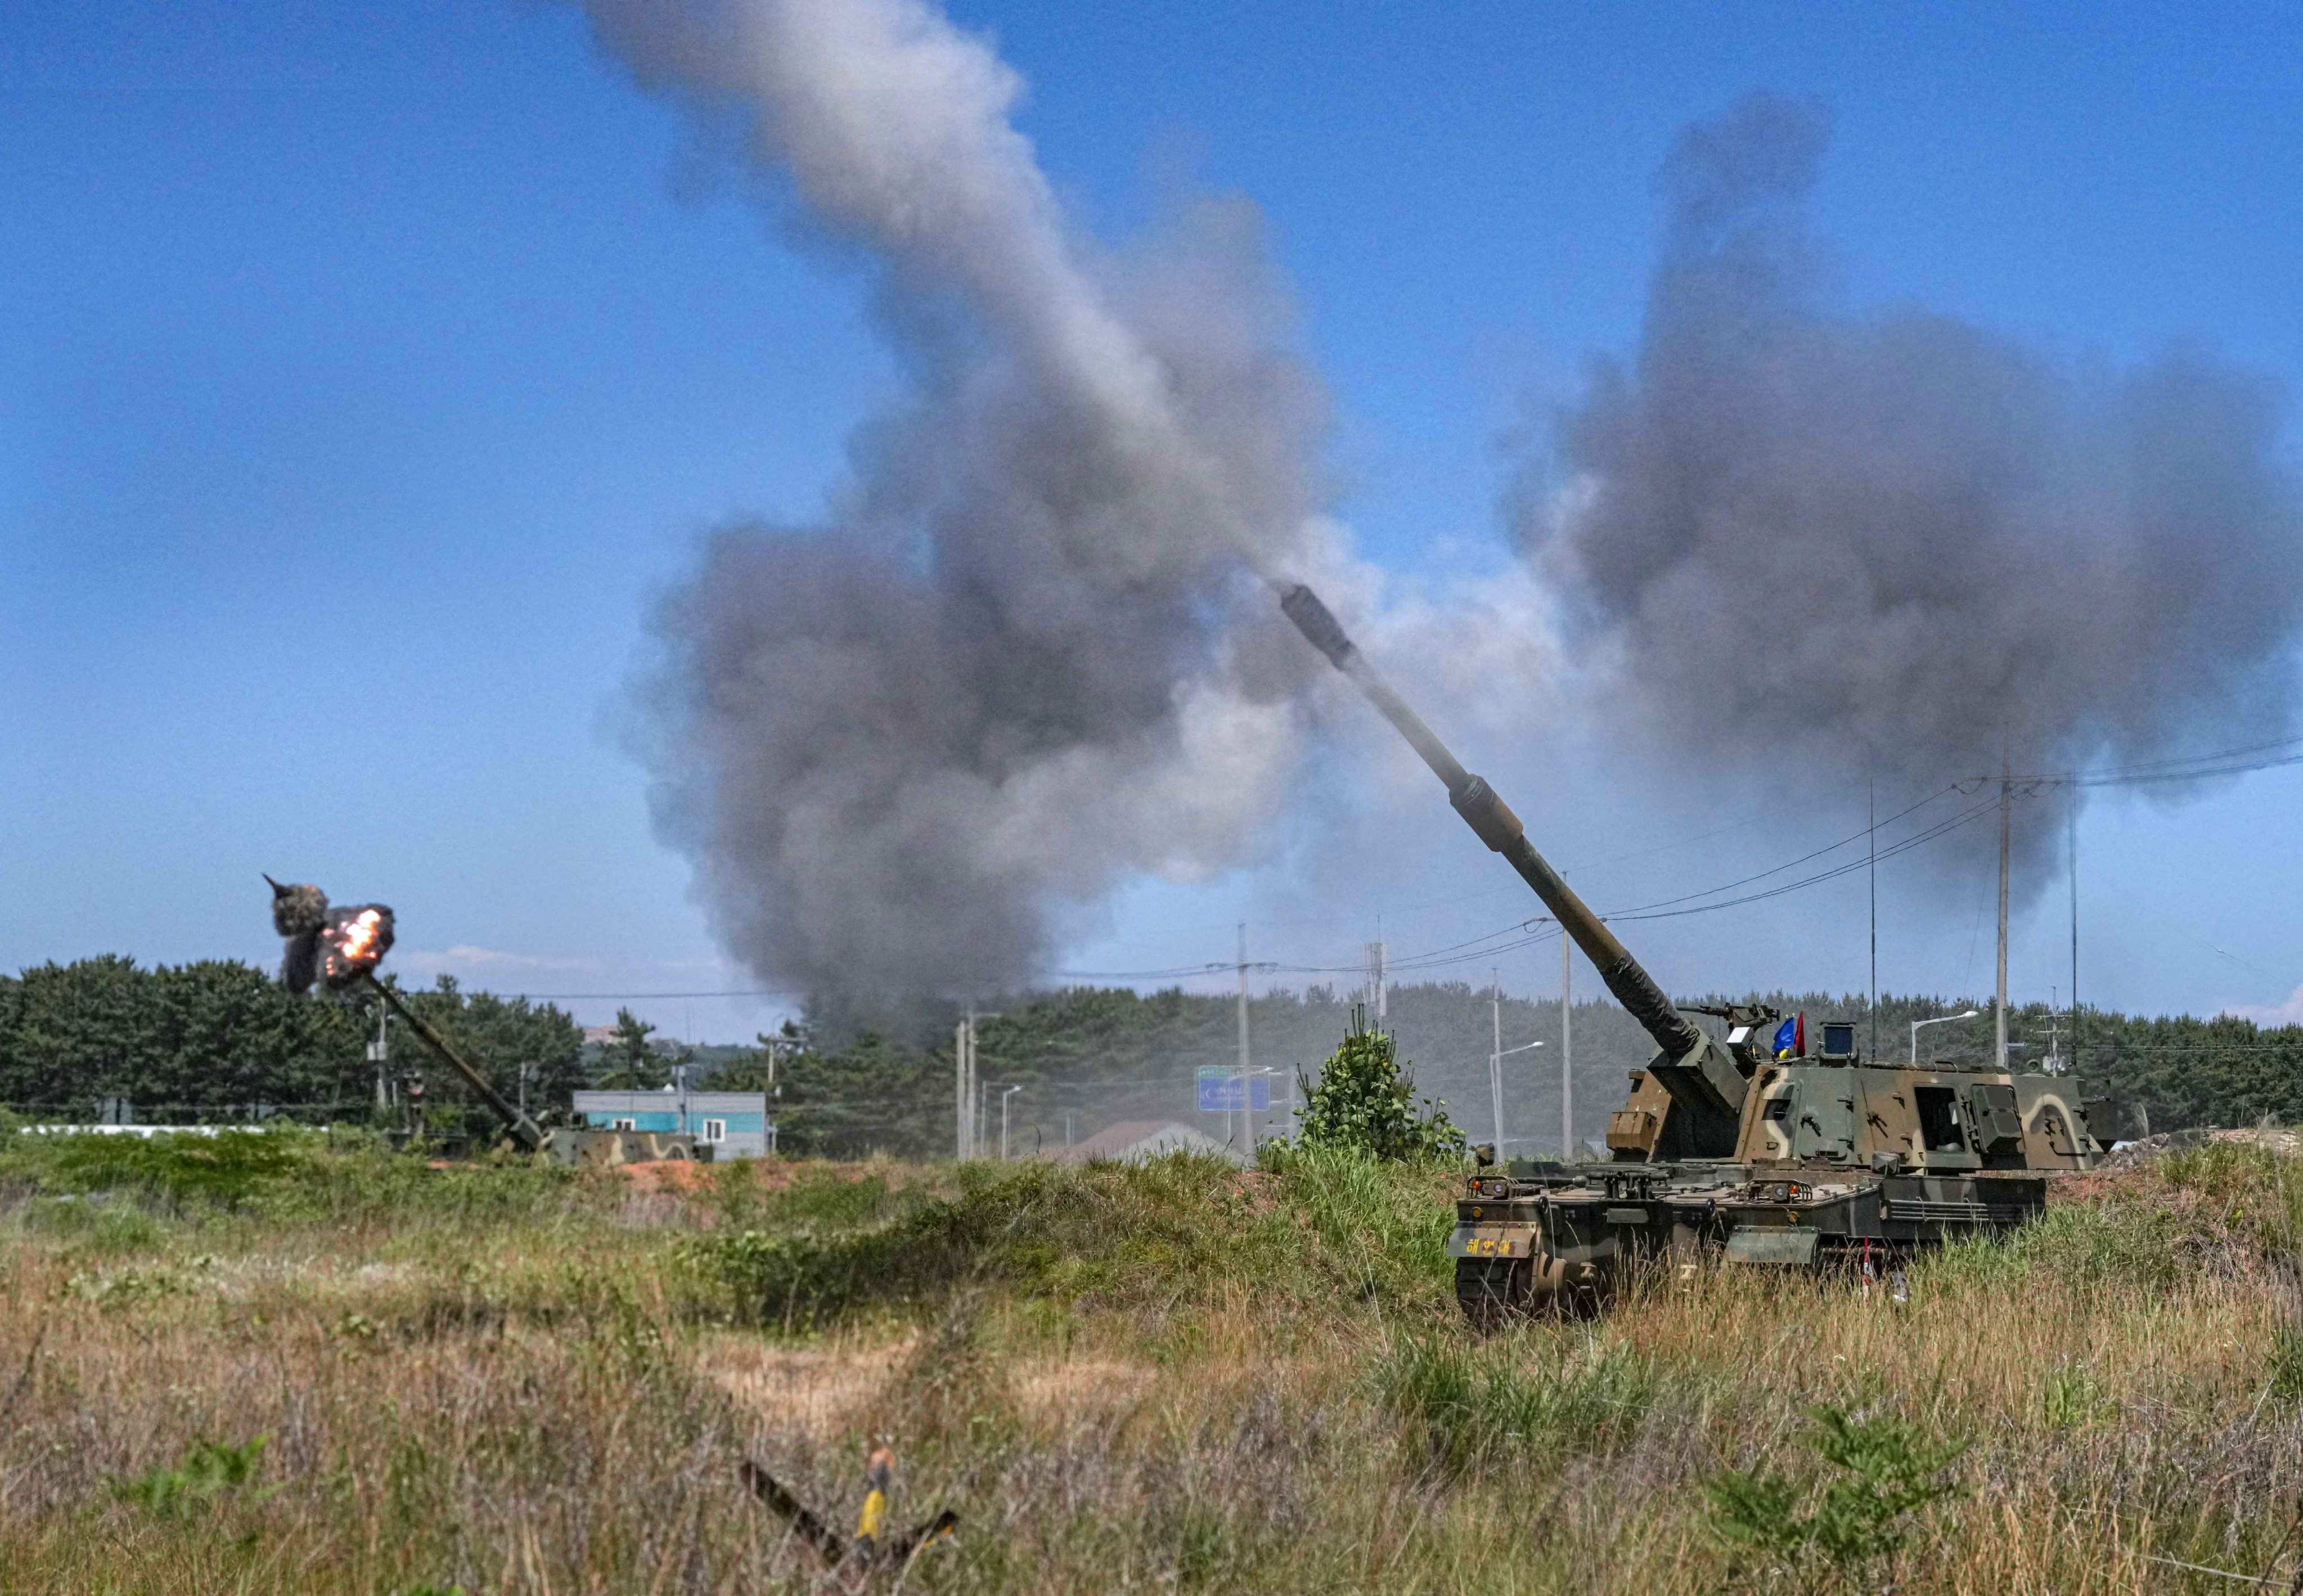 South Korean self-propelled howitzers during live-fire drills at an undisclosed island near the inter-Korean border in June. Photo: Handout / South Korean Defence Ministry / AFP